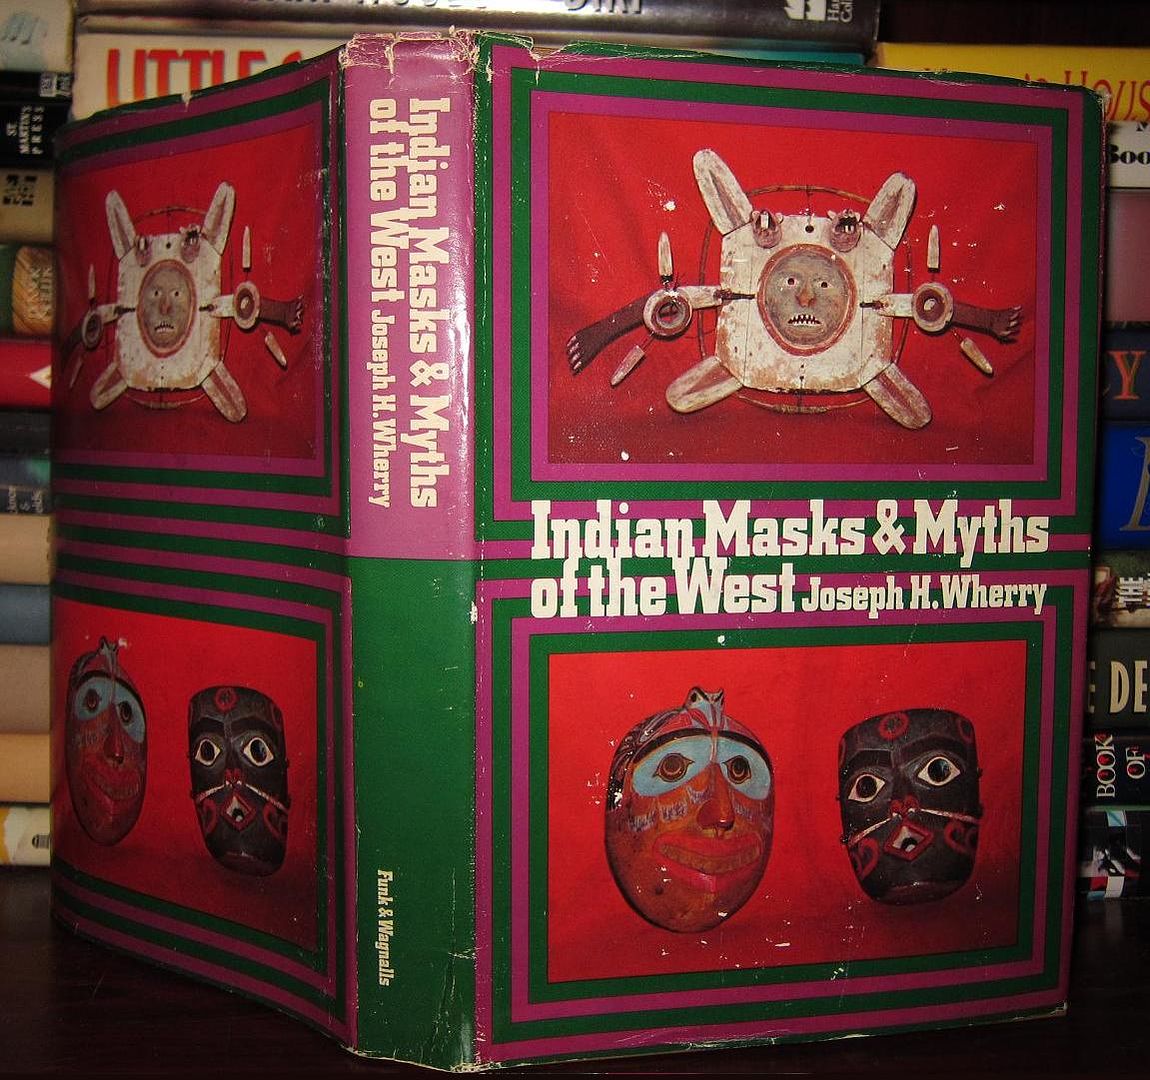 WHERRY, JOSEPH H. - Indian Masks and Myths of the West